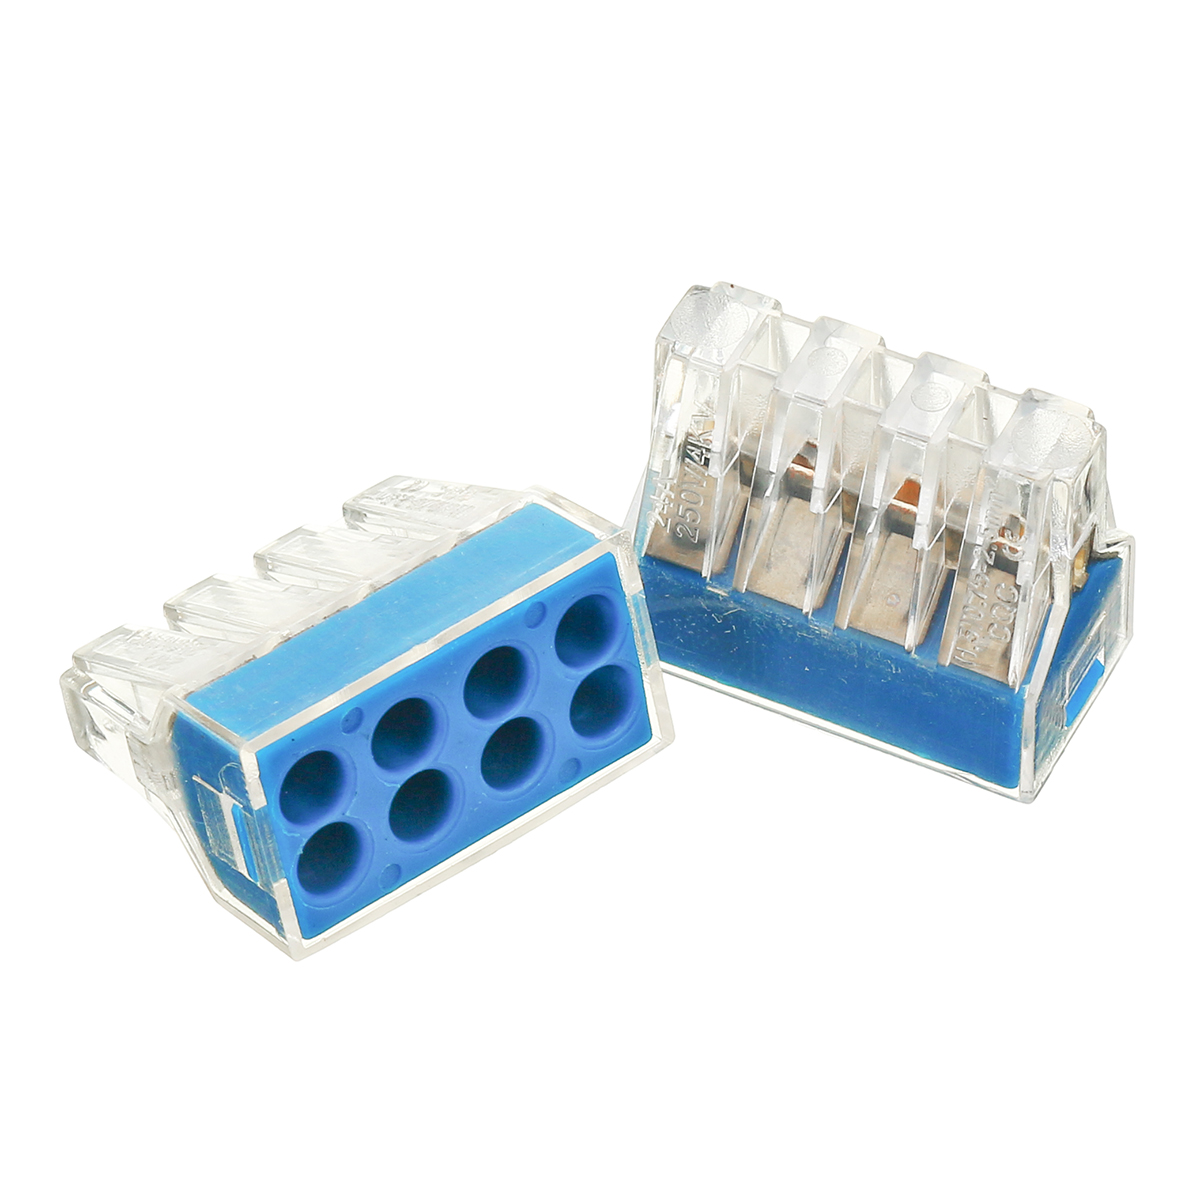 10Pcs-8-Holes-Universal-Compact-Terminal-Block-Electric-Cable-Wire-Connector-1384417-6